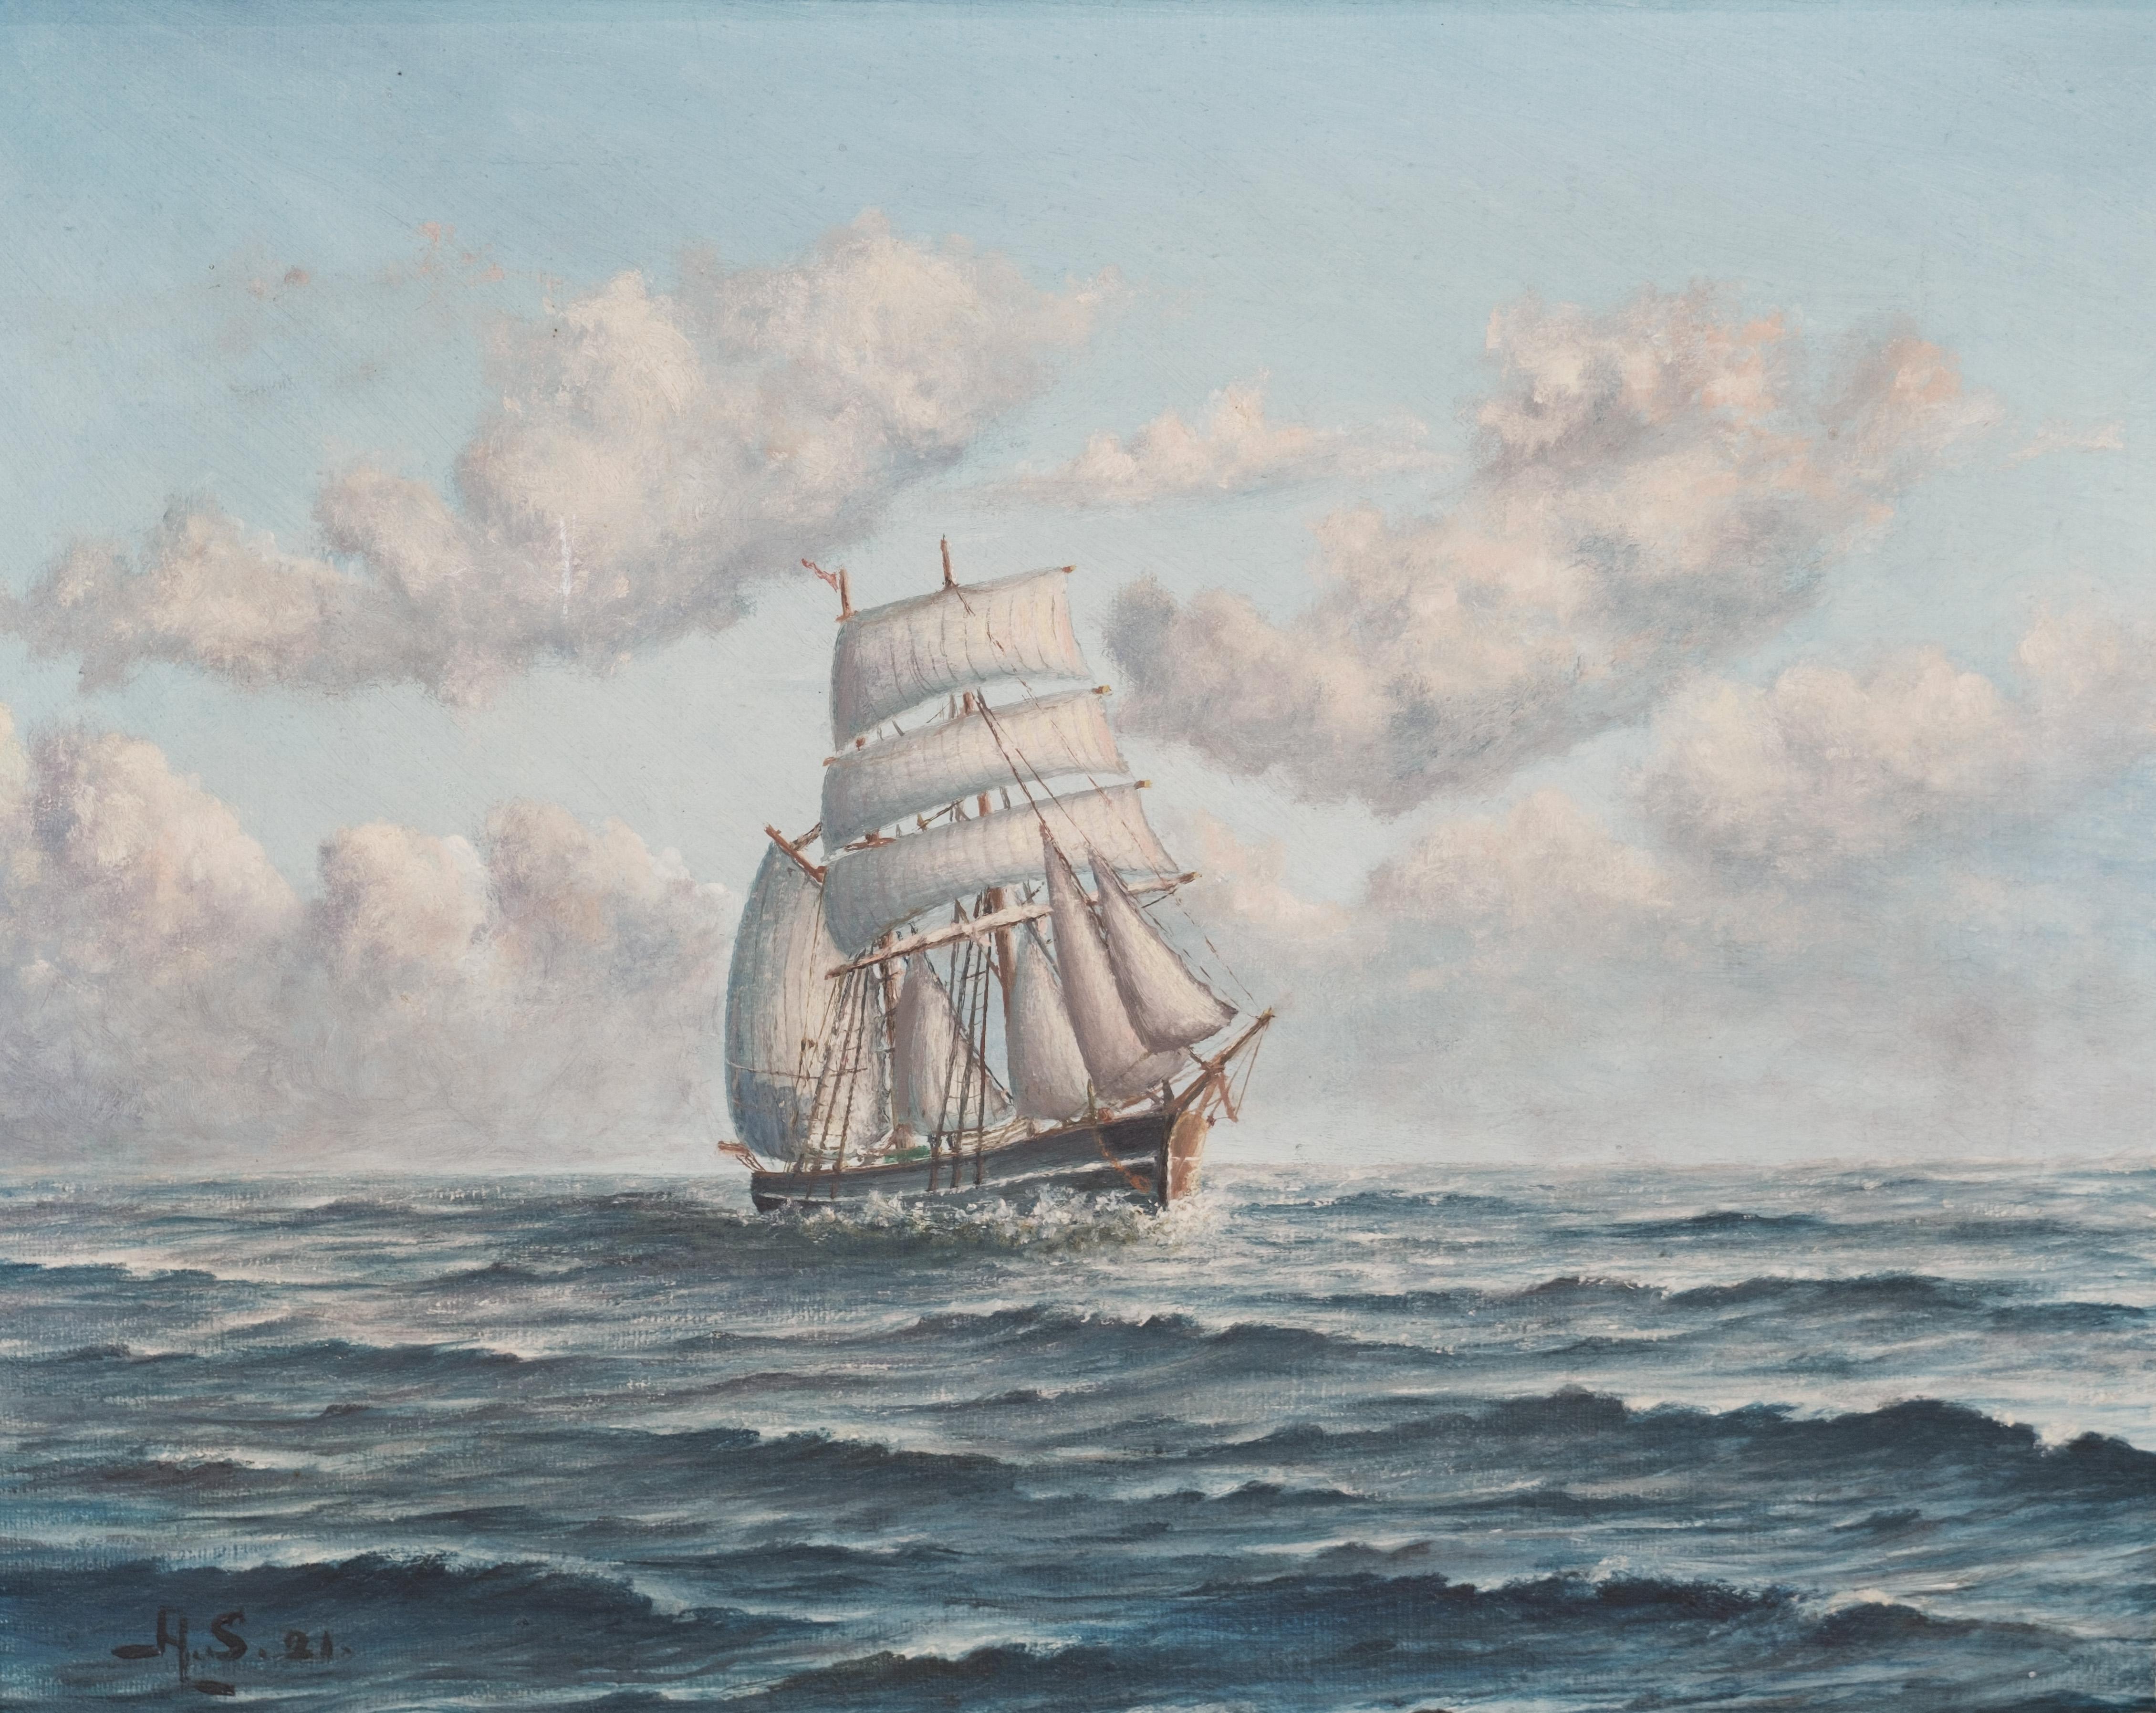 Marine painting of sea, ship and clouds with gold frame signed H.S 21 from the 1920s.
Measurement: Height: 56 cm width: 66 cm depth: 6 cm
Great condition.